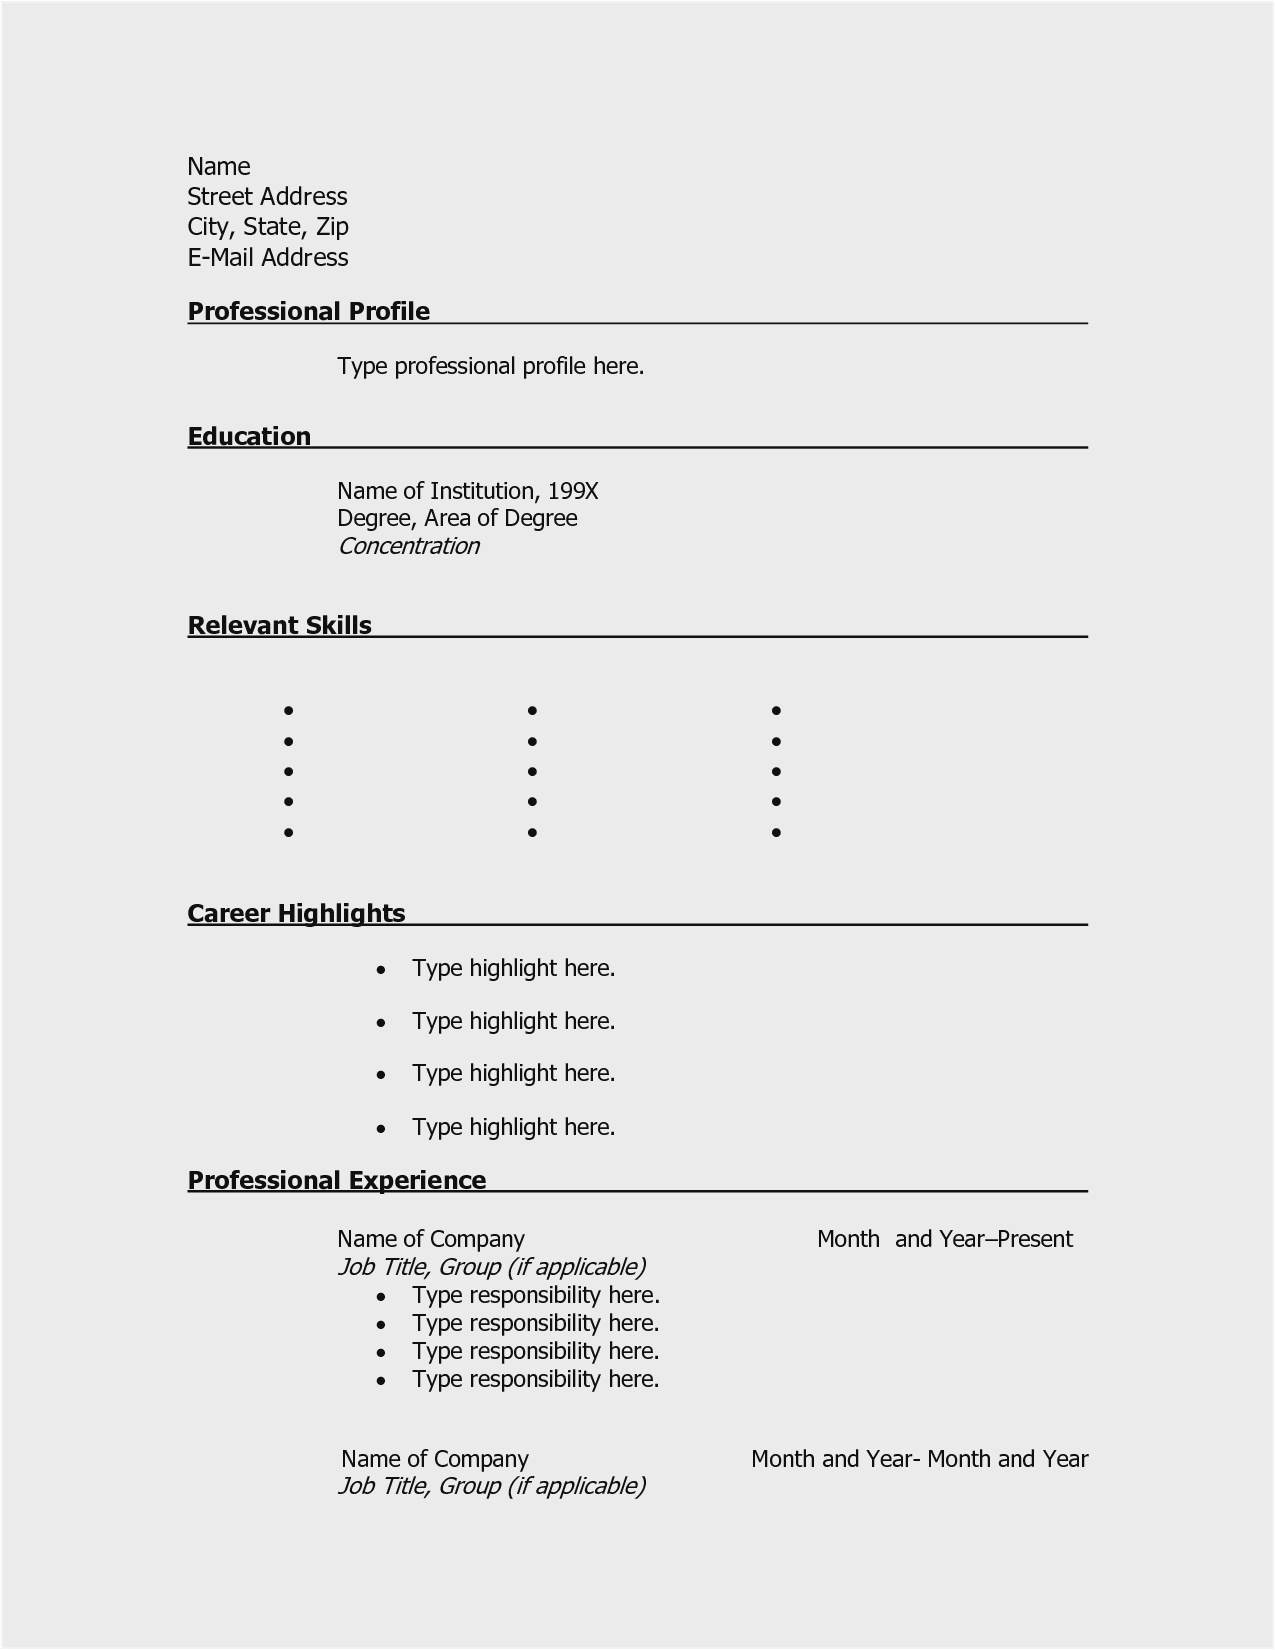 Resume Templates that are Actually Free Resume Templates Pdf